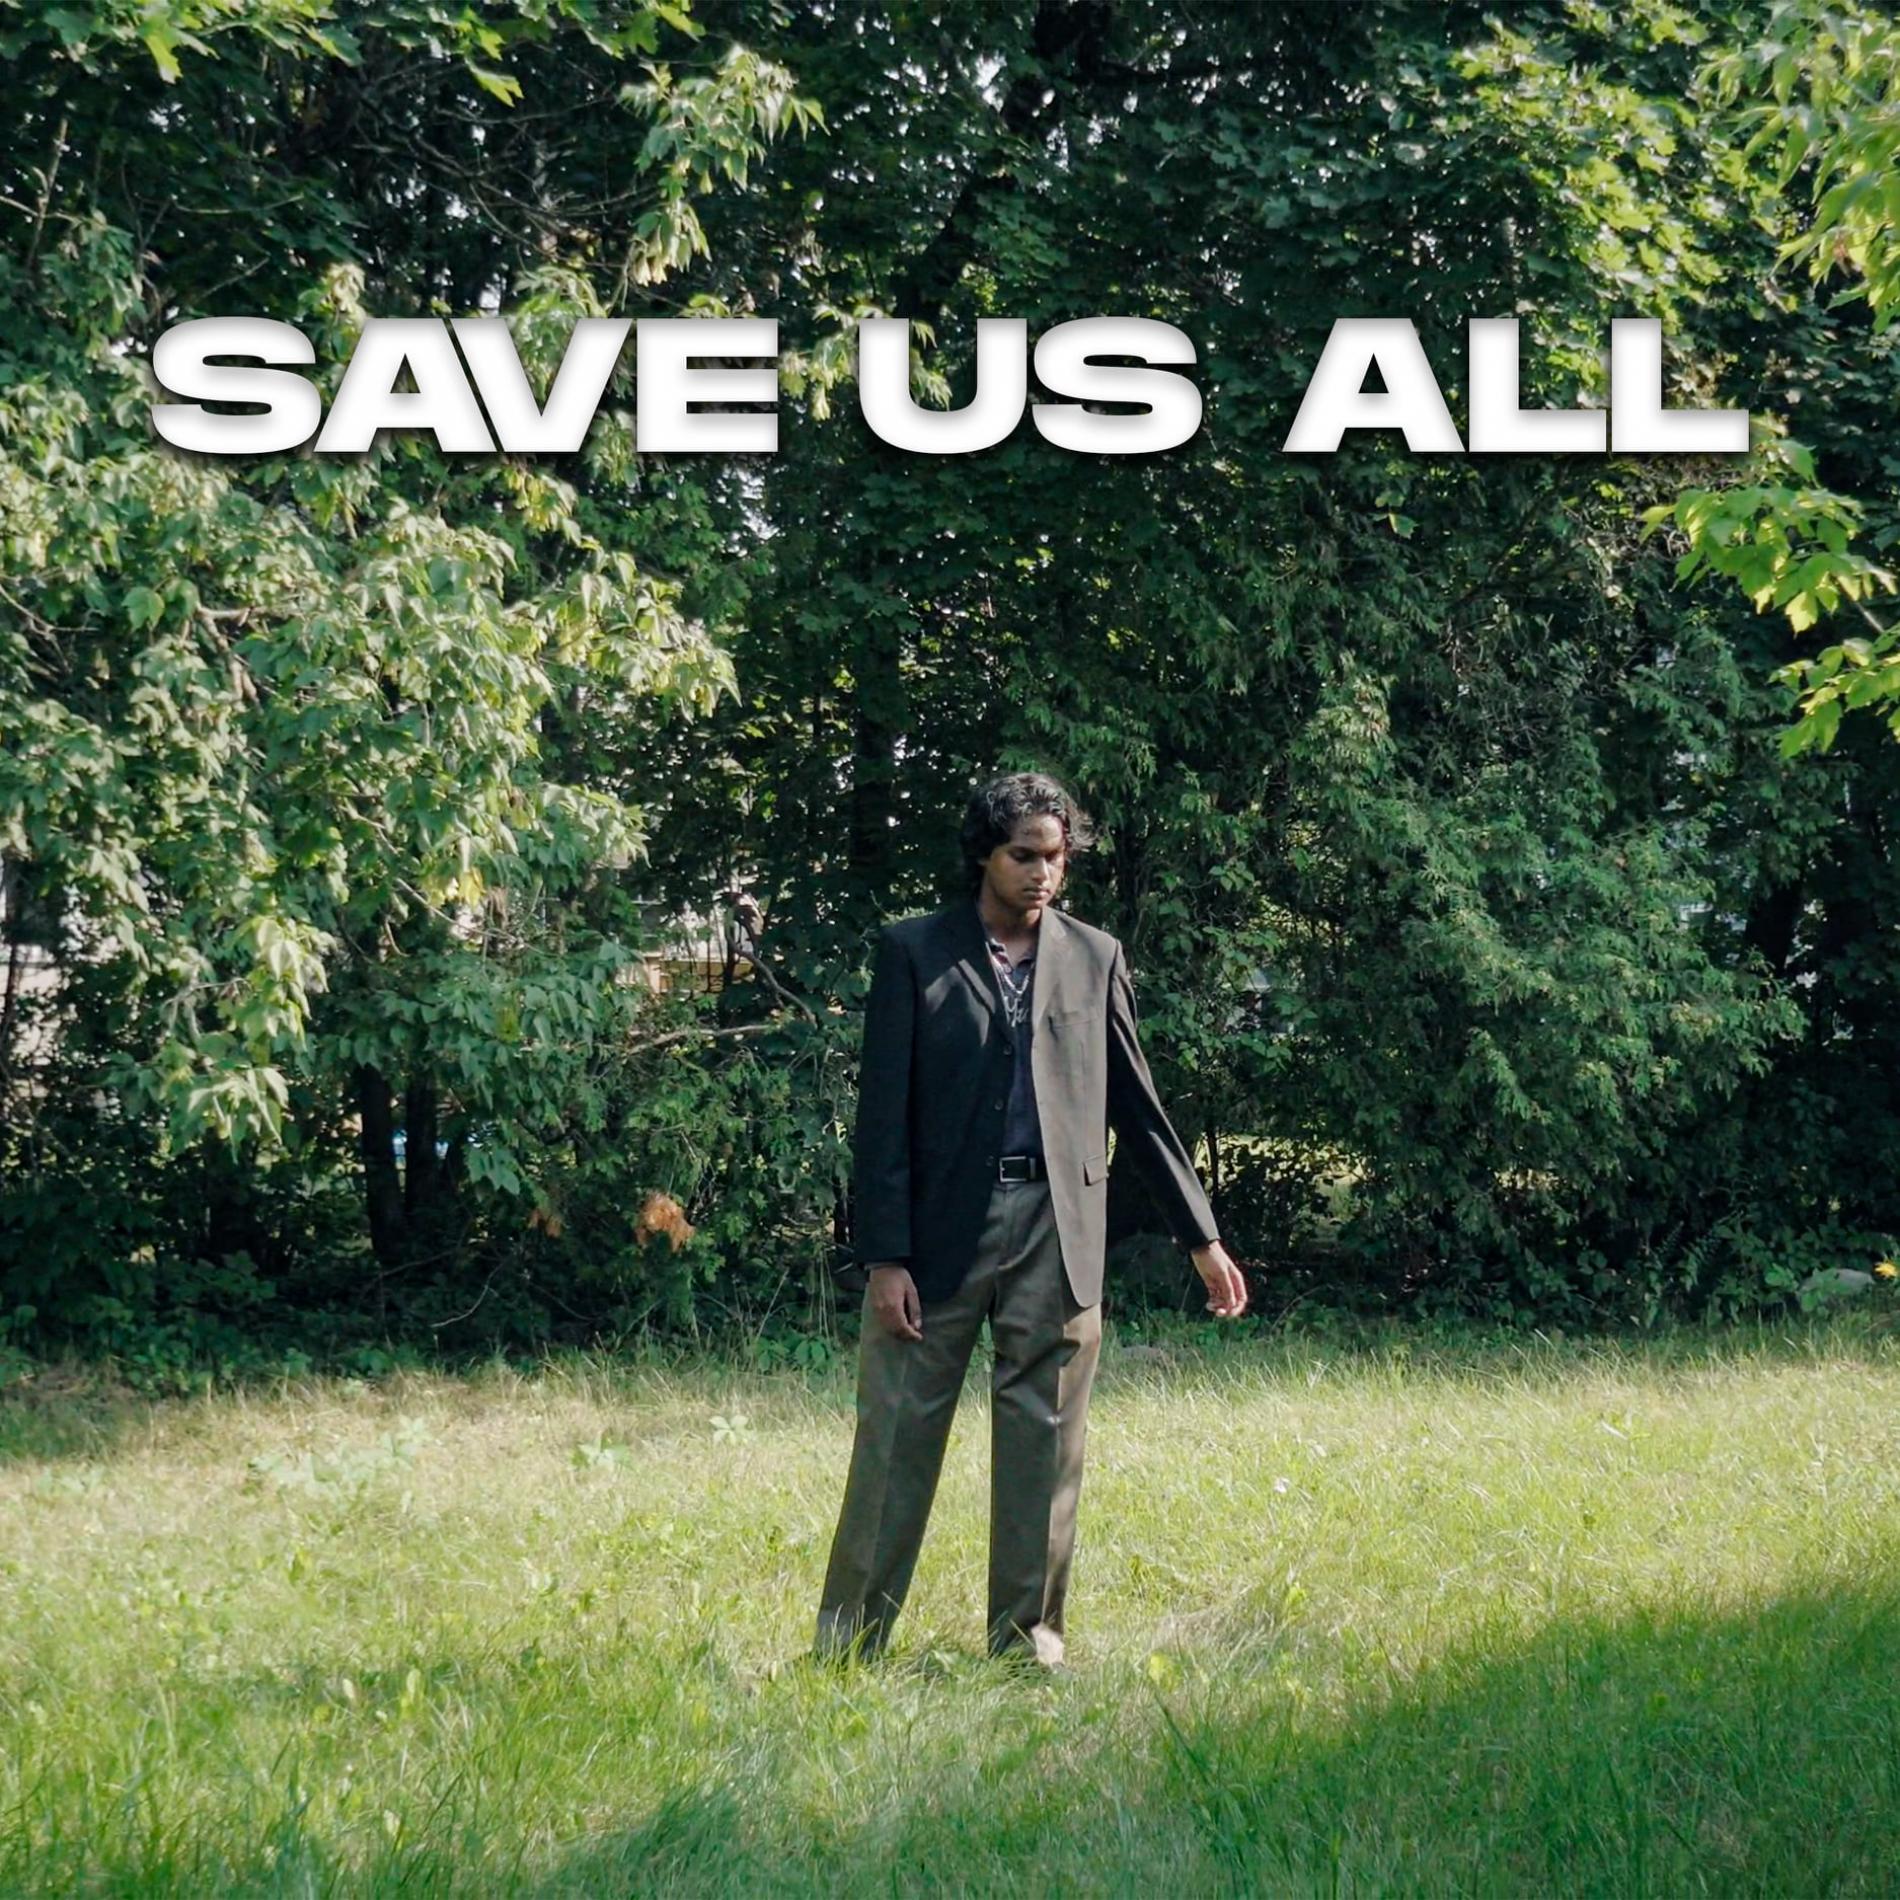 New Music : Duava – Save Us All (Official Music Video)